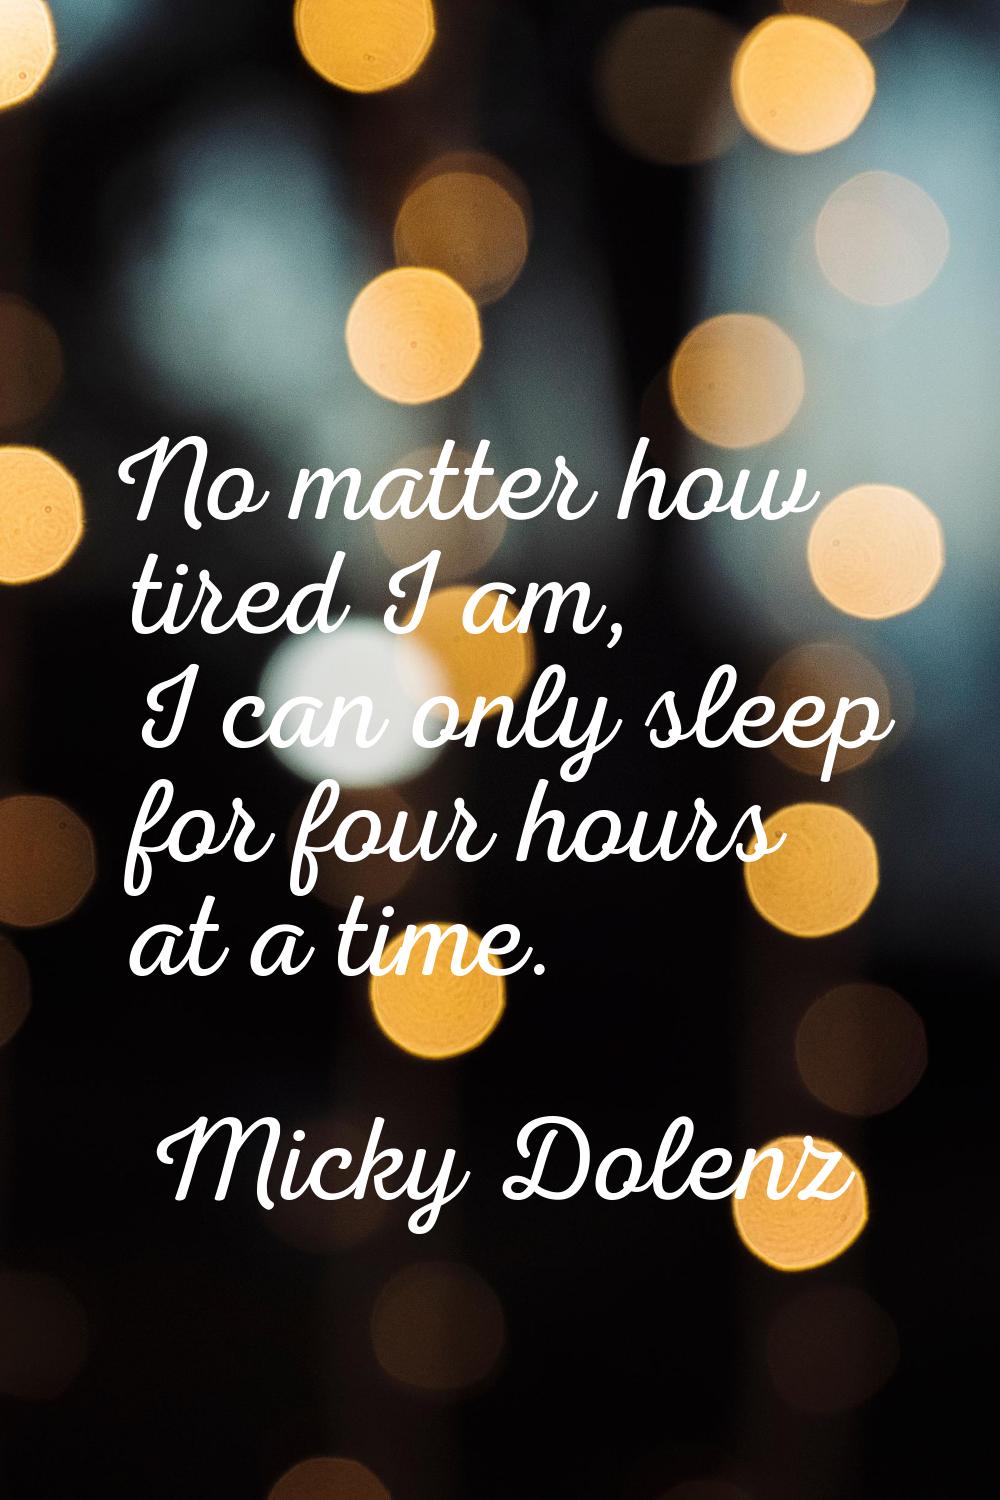 No matter how tired I am, I can only sleep for four hours at a time.